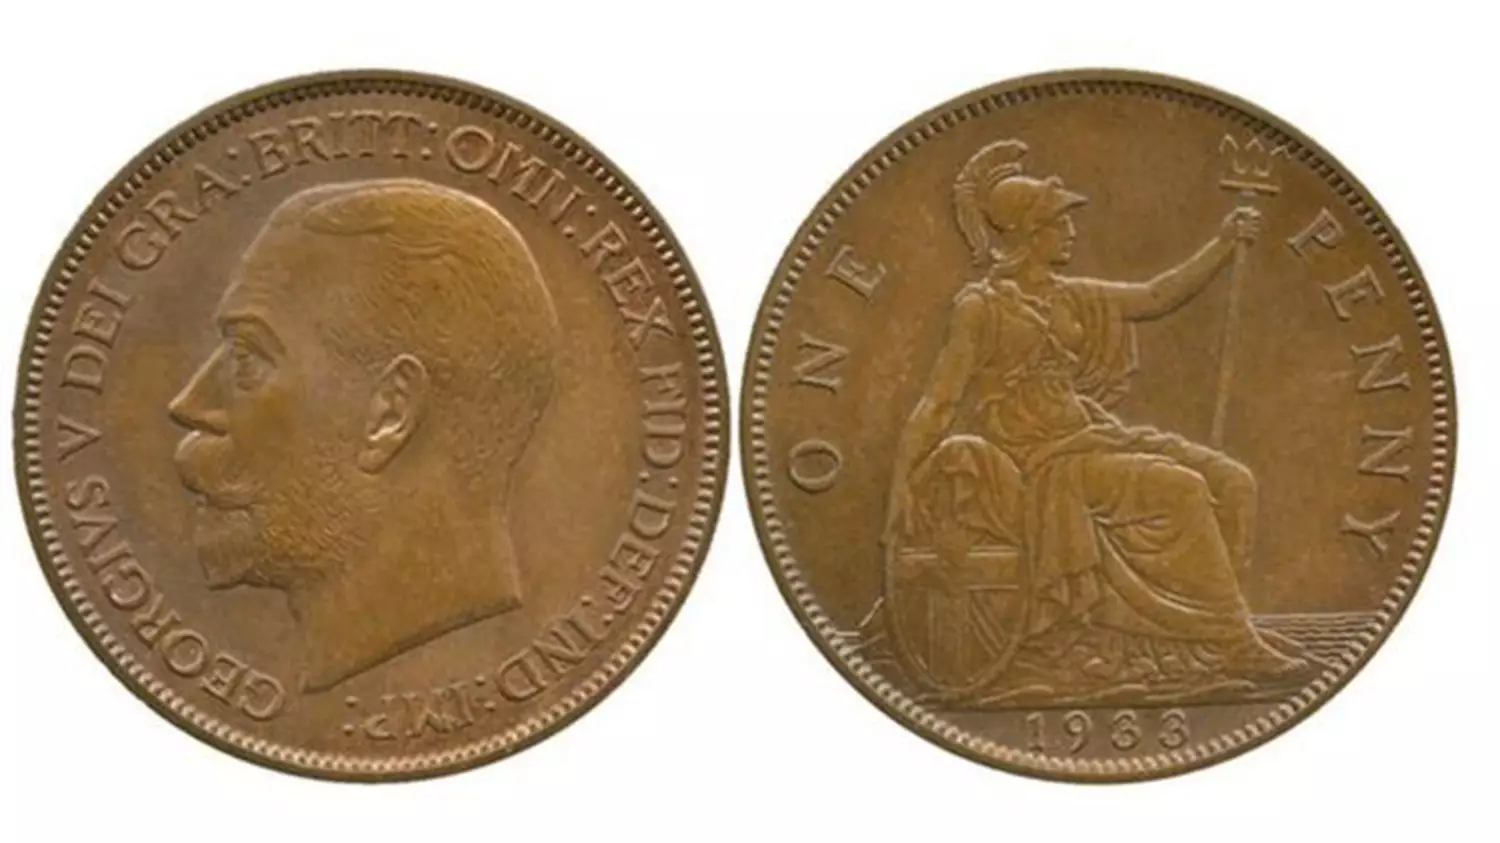 Extremely Rare One Pence Piece Auctioned Off For £72,000